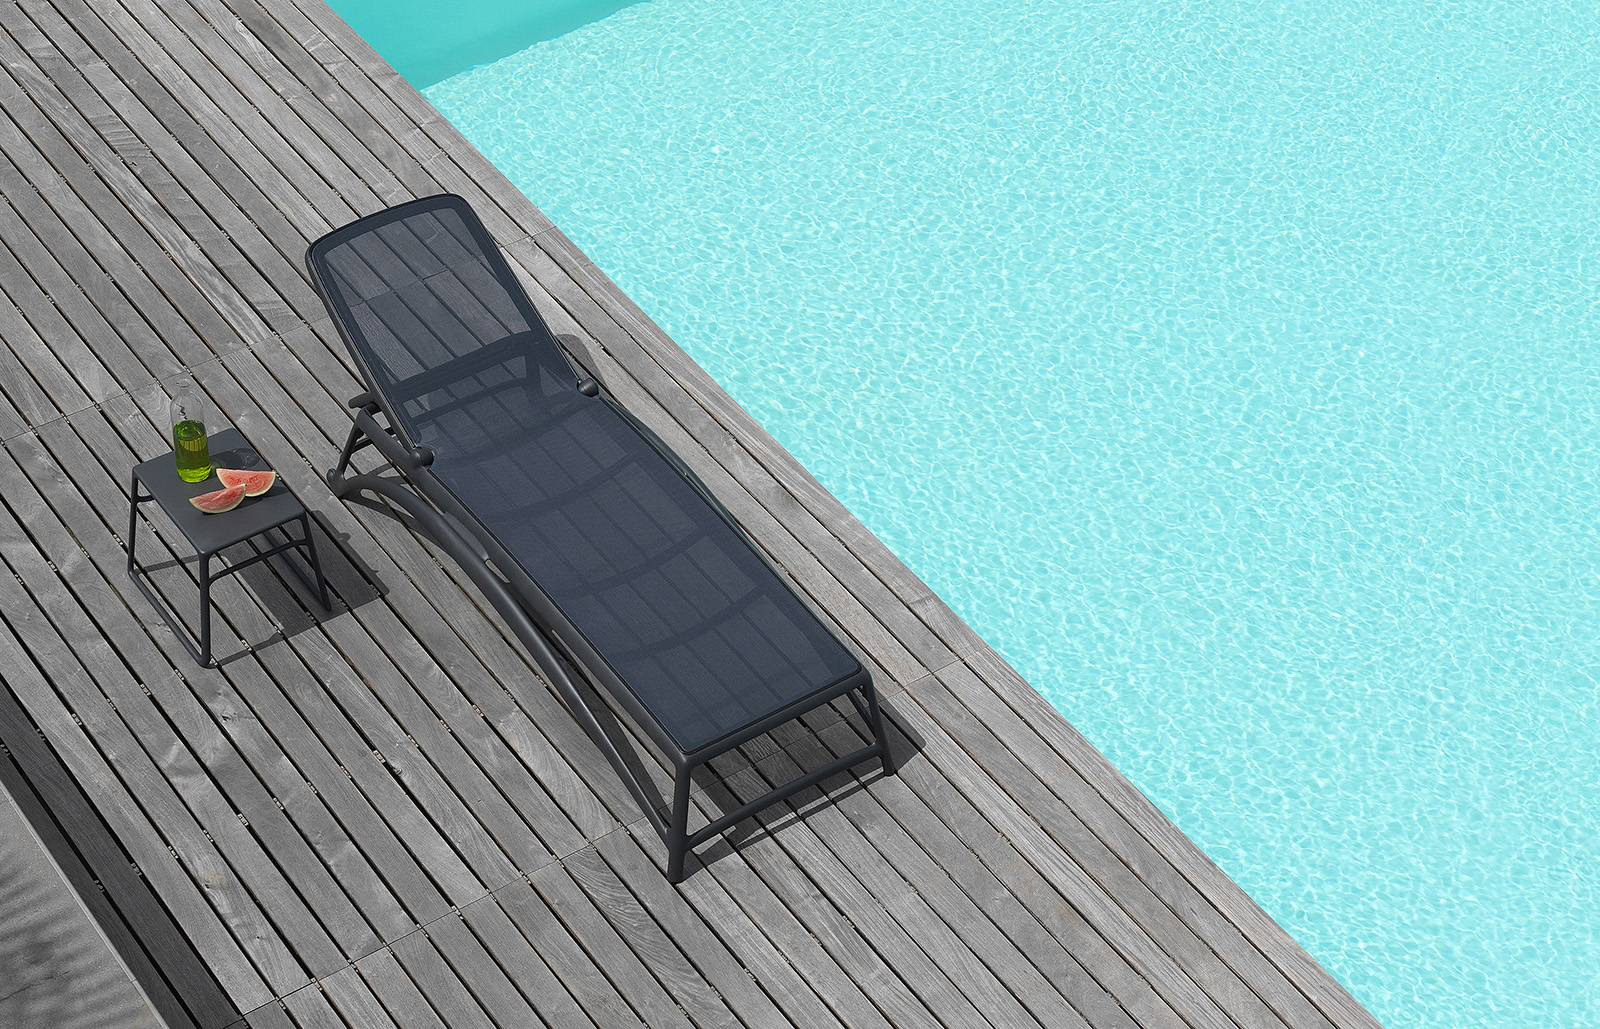 Atlantico sun lounger in charcoal by the pool, Nardi outdoor furniture